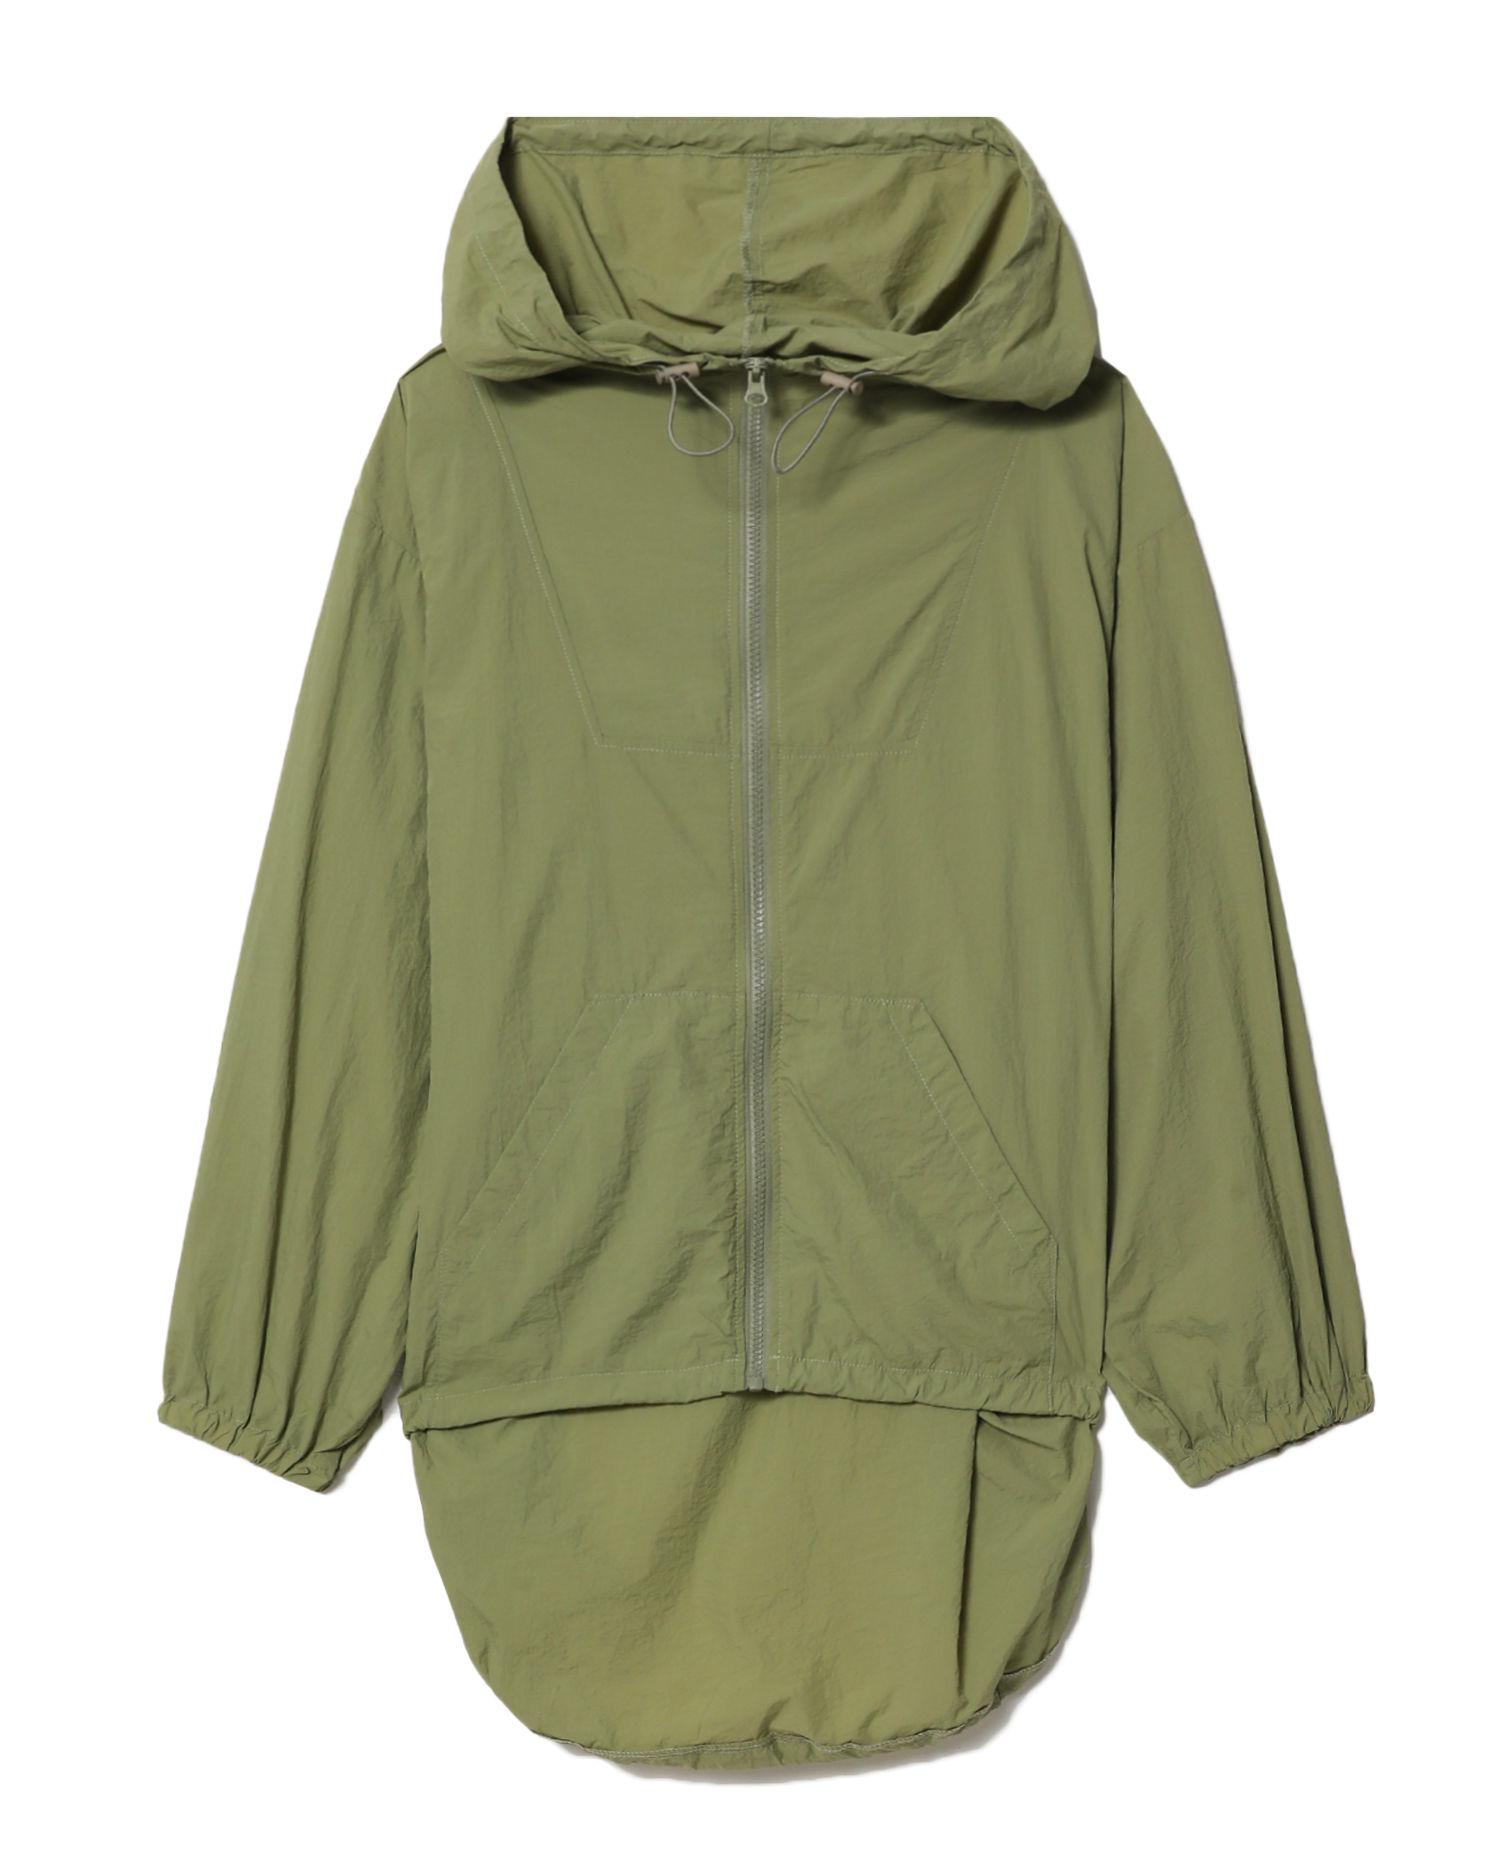 Hooded outdoor zip jacket by AS KNOW AS PINKY